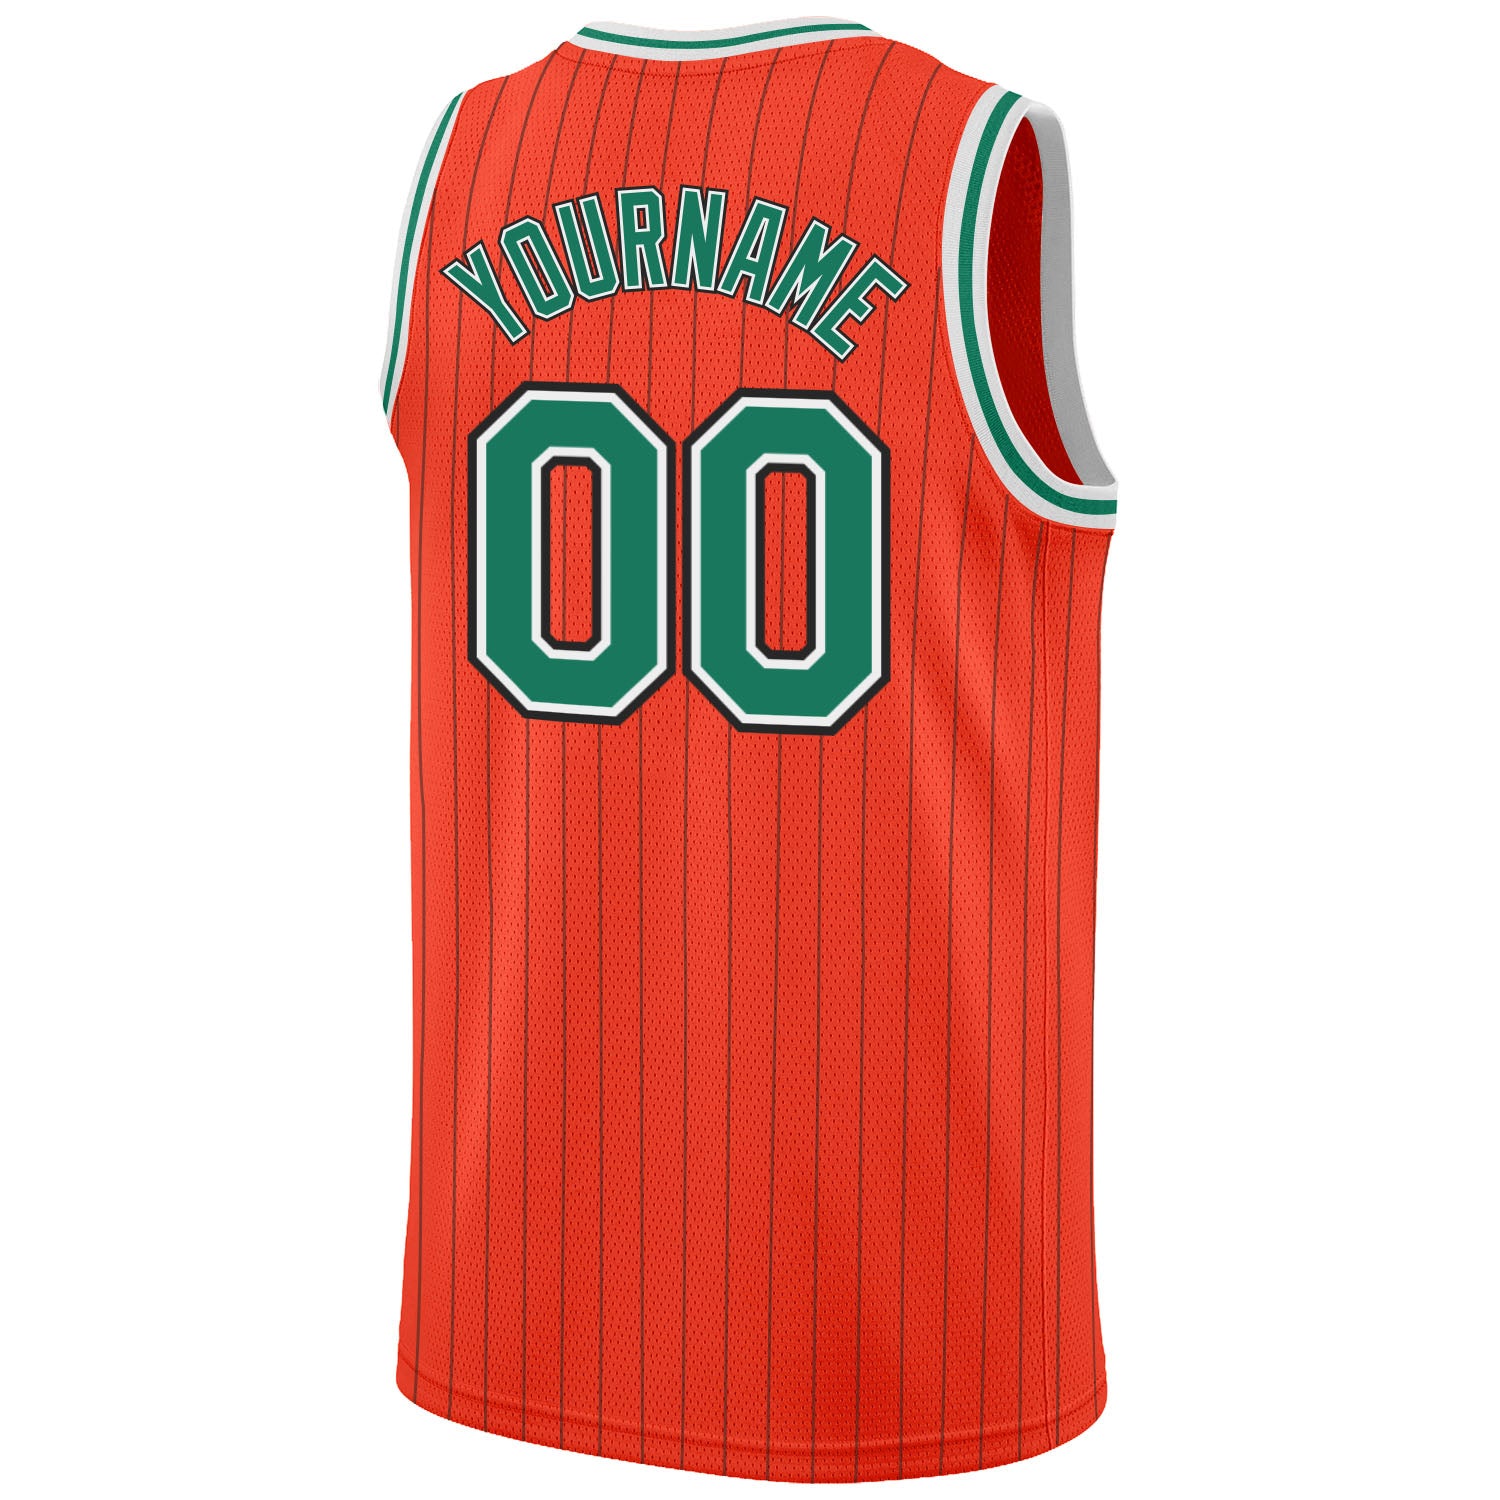 FANSIDEA Custom Basketball Jersey Kelly Green Red-White 3D Mexico Watercolored Splashes Grunge Design Authentic Men's Size:L